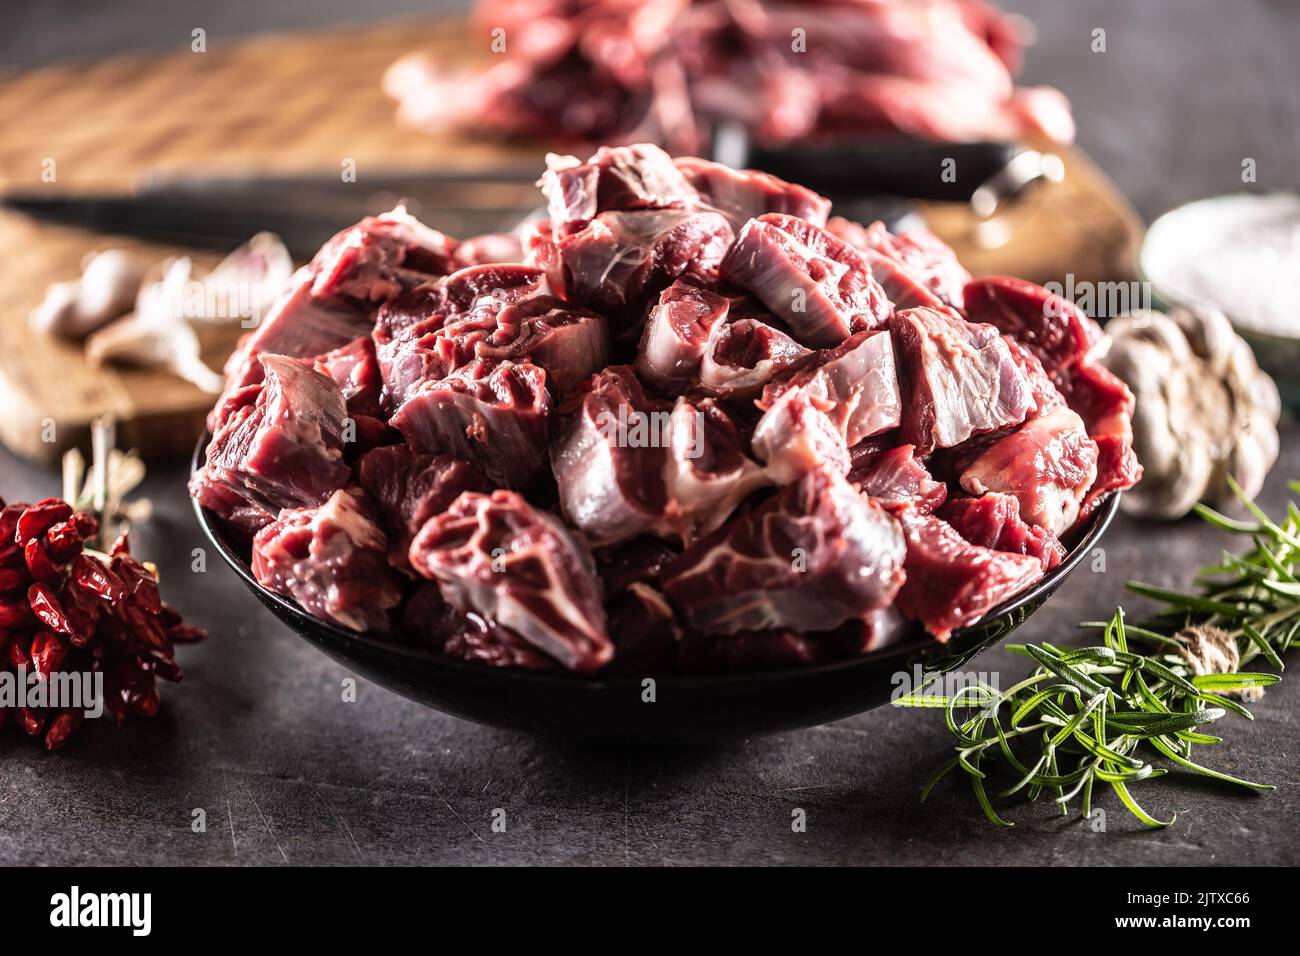 Fresh organic beef shank cuts in a bowl ready to be cooked with condiments. Stock Photo